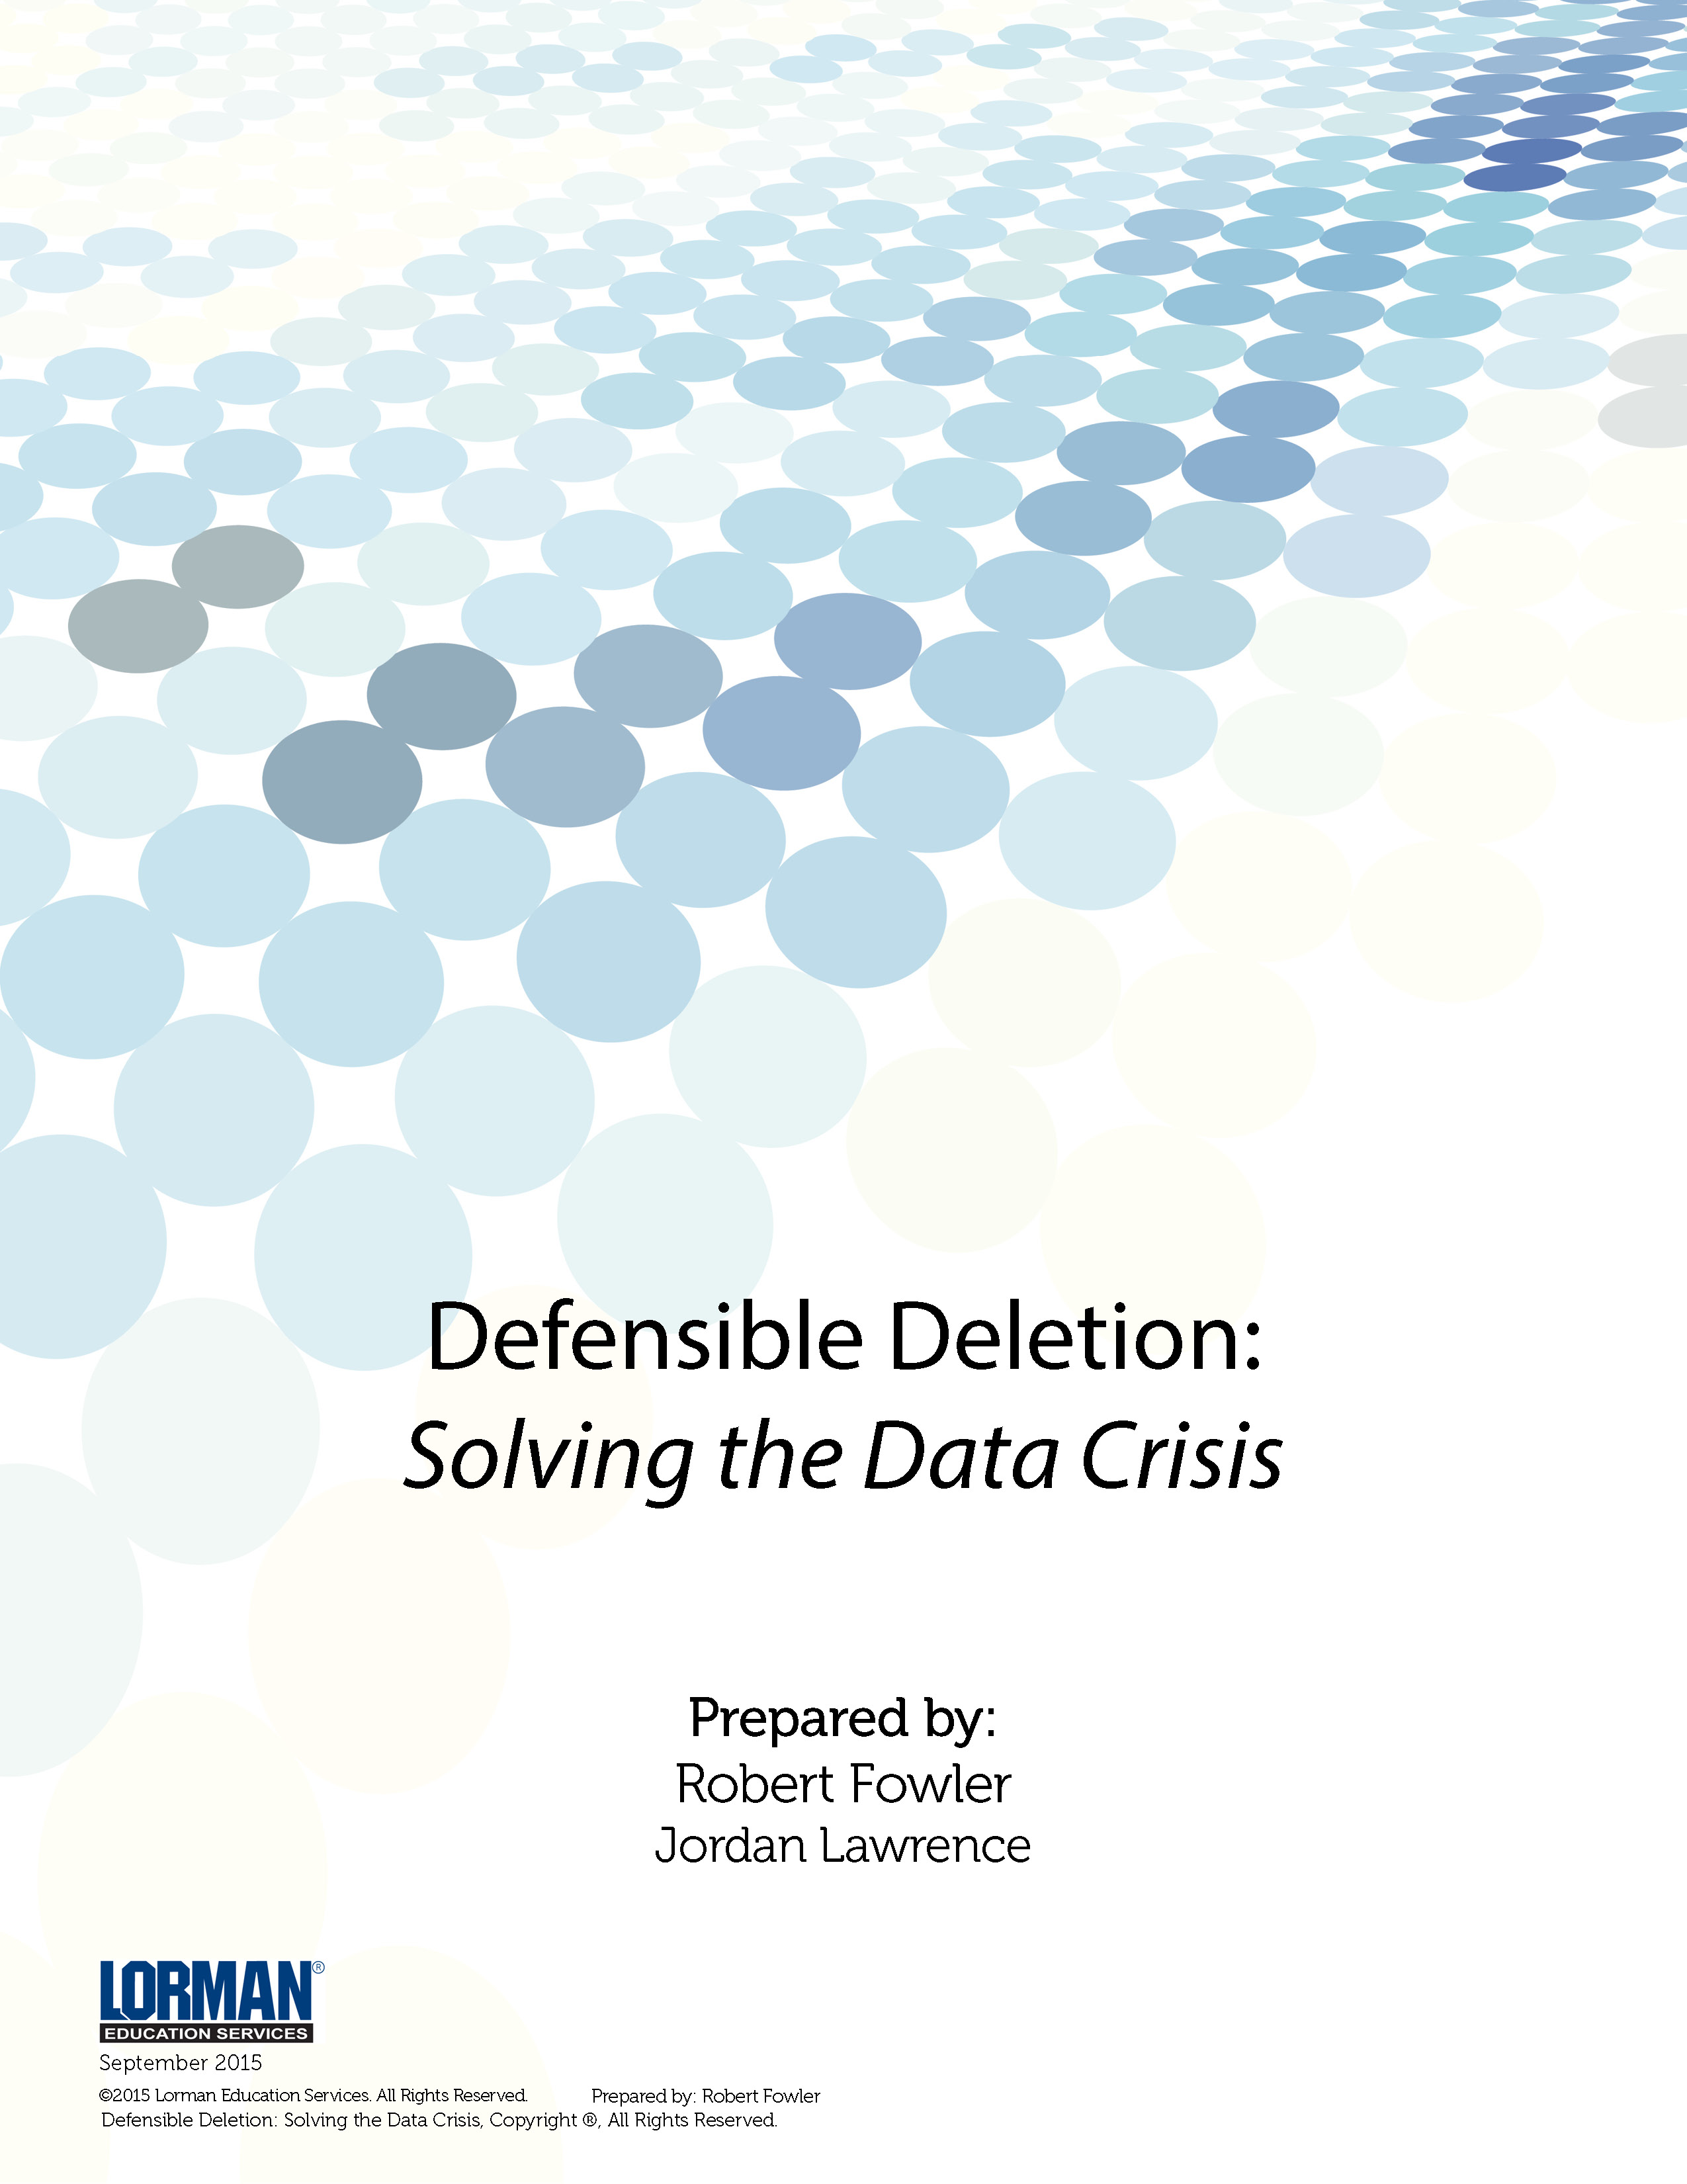 Defensible Deletion - Solving the Data Crisis